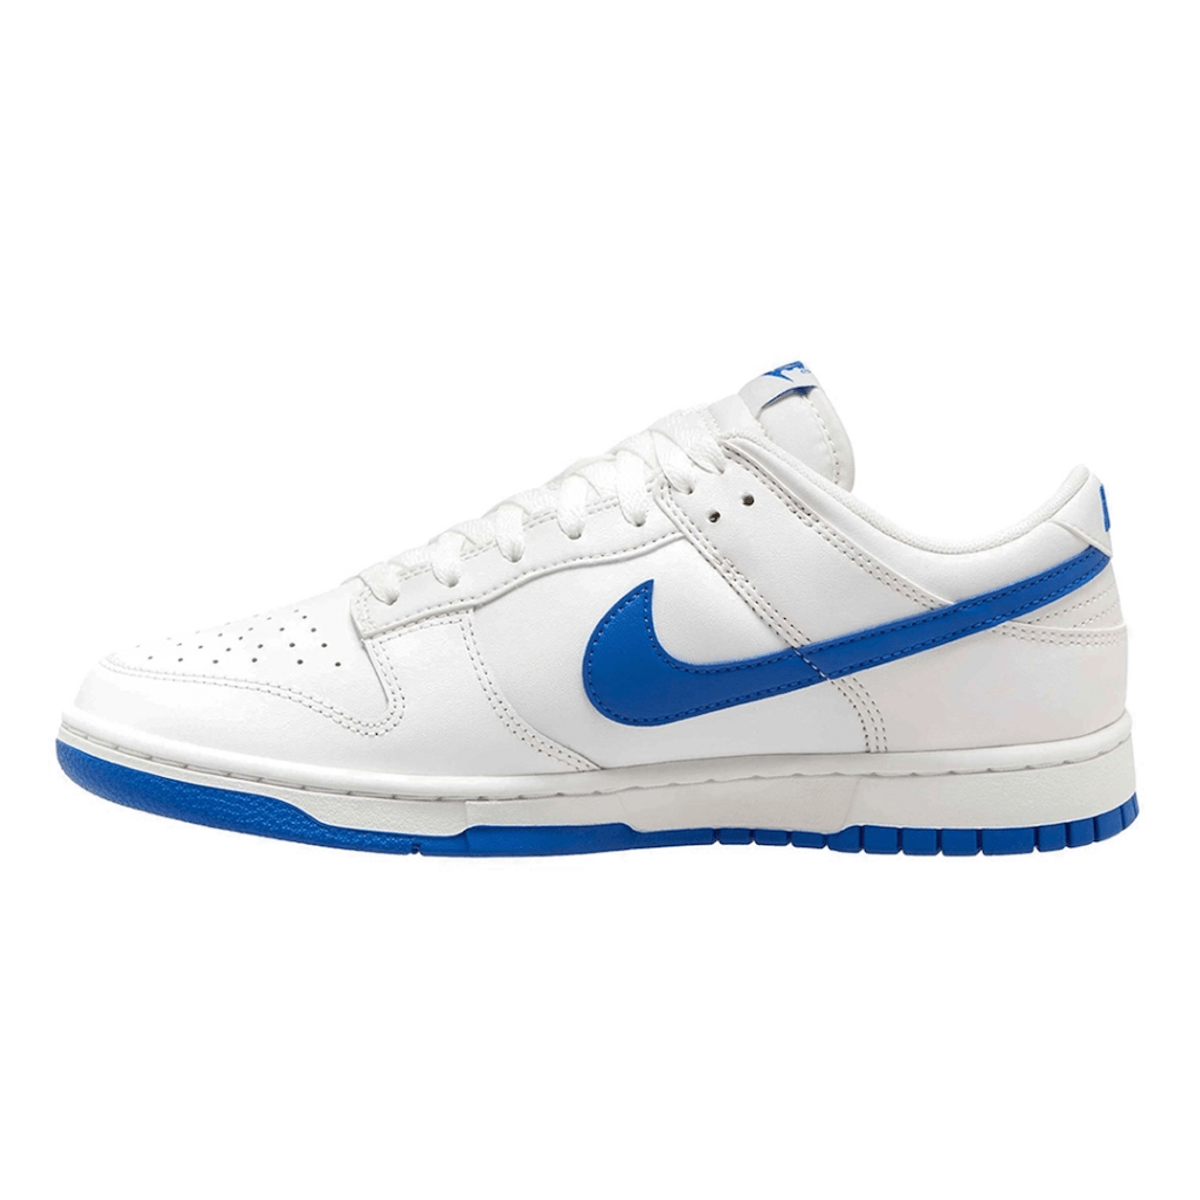 The Nike Dunk Low Hyper Royal Is Coming In Fall 2023